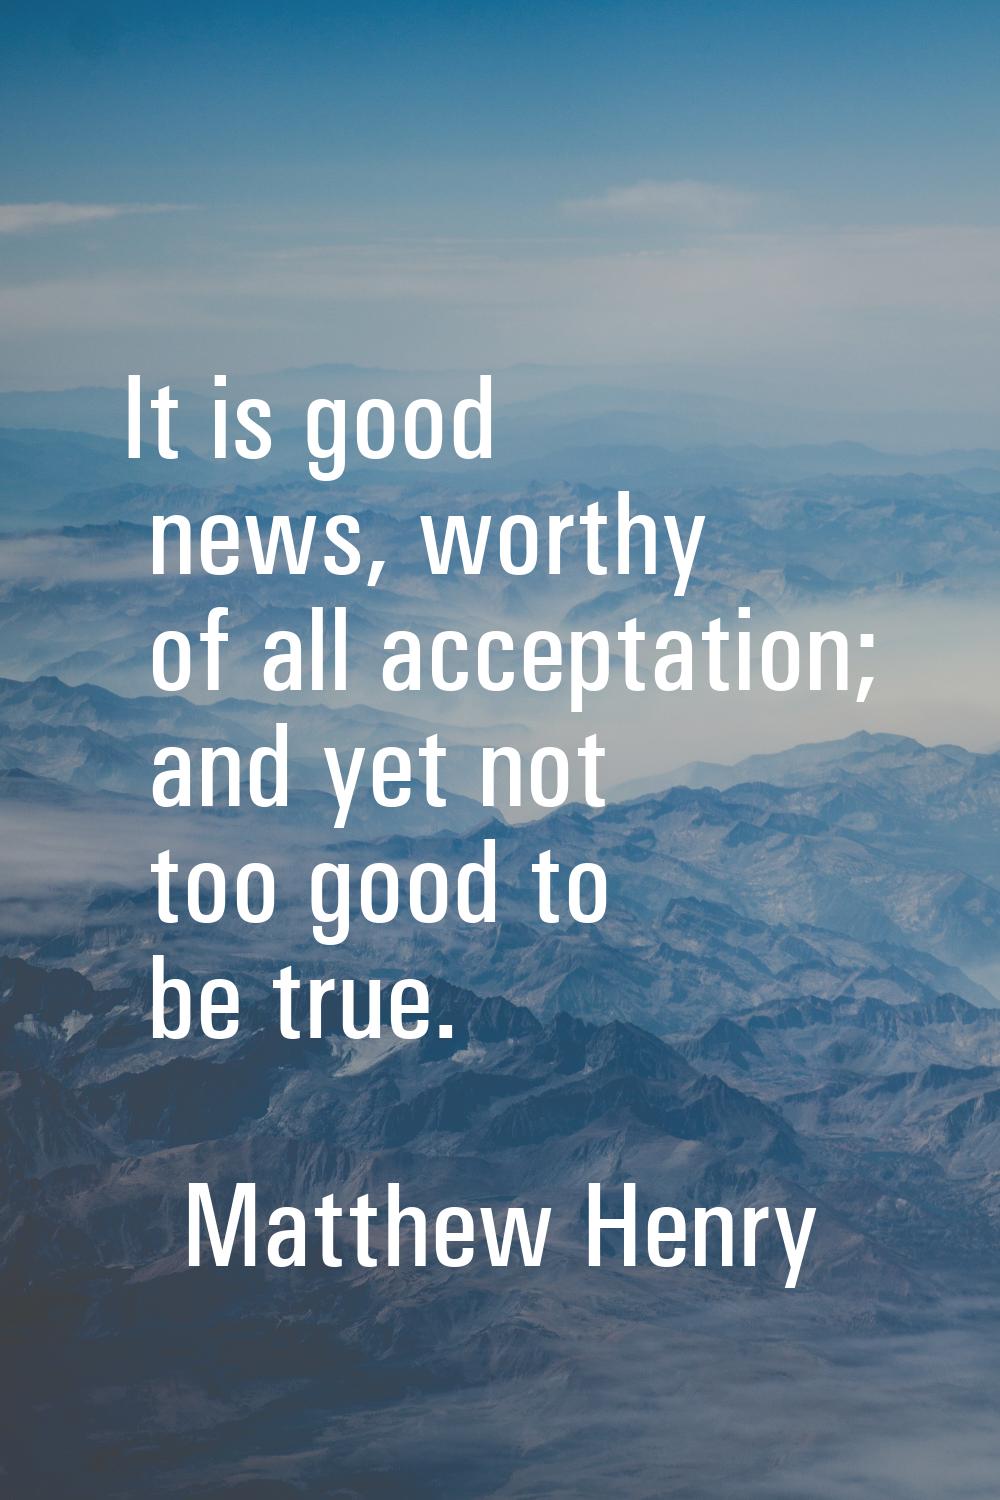 It is good news, worthy of all acceptation; and yet not too good to be true.